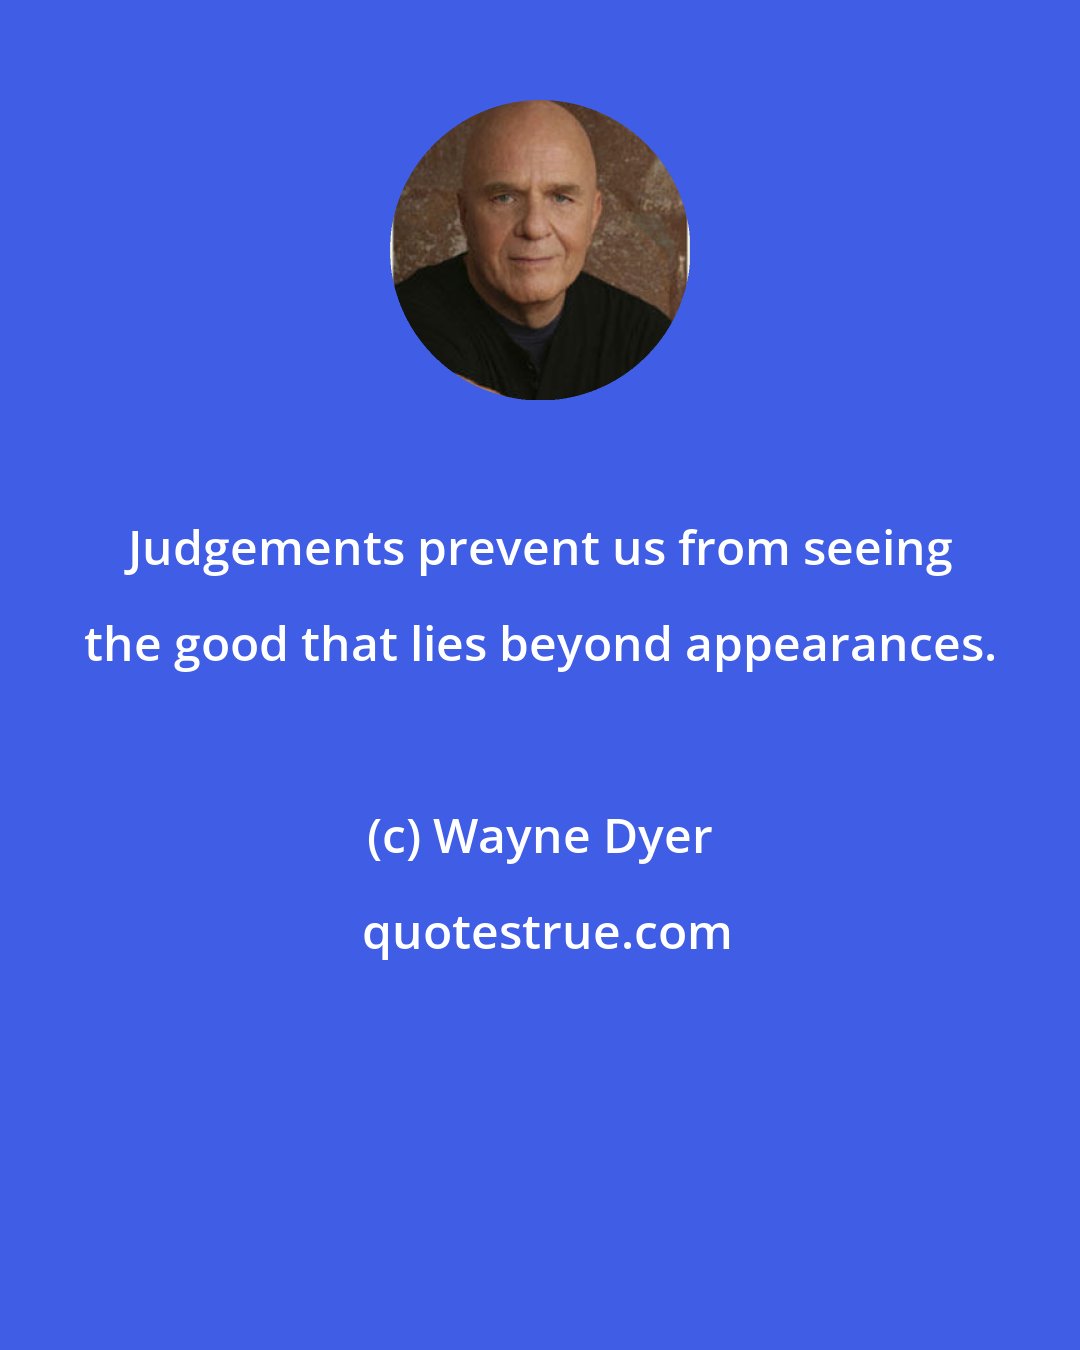 Wayne Dyer: Judgements prevent us from seeing the good that lies beyond appearances.